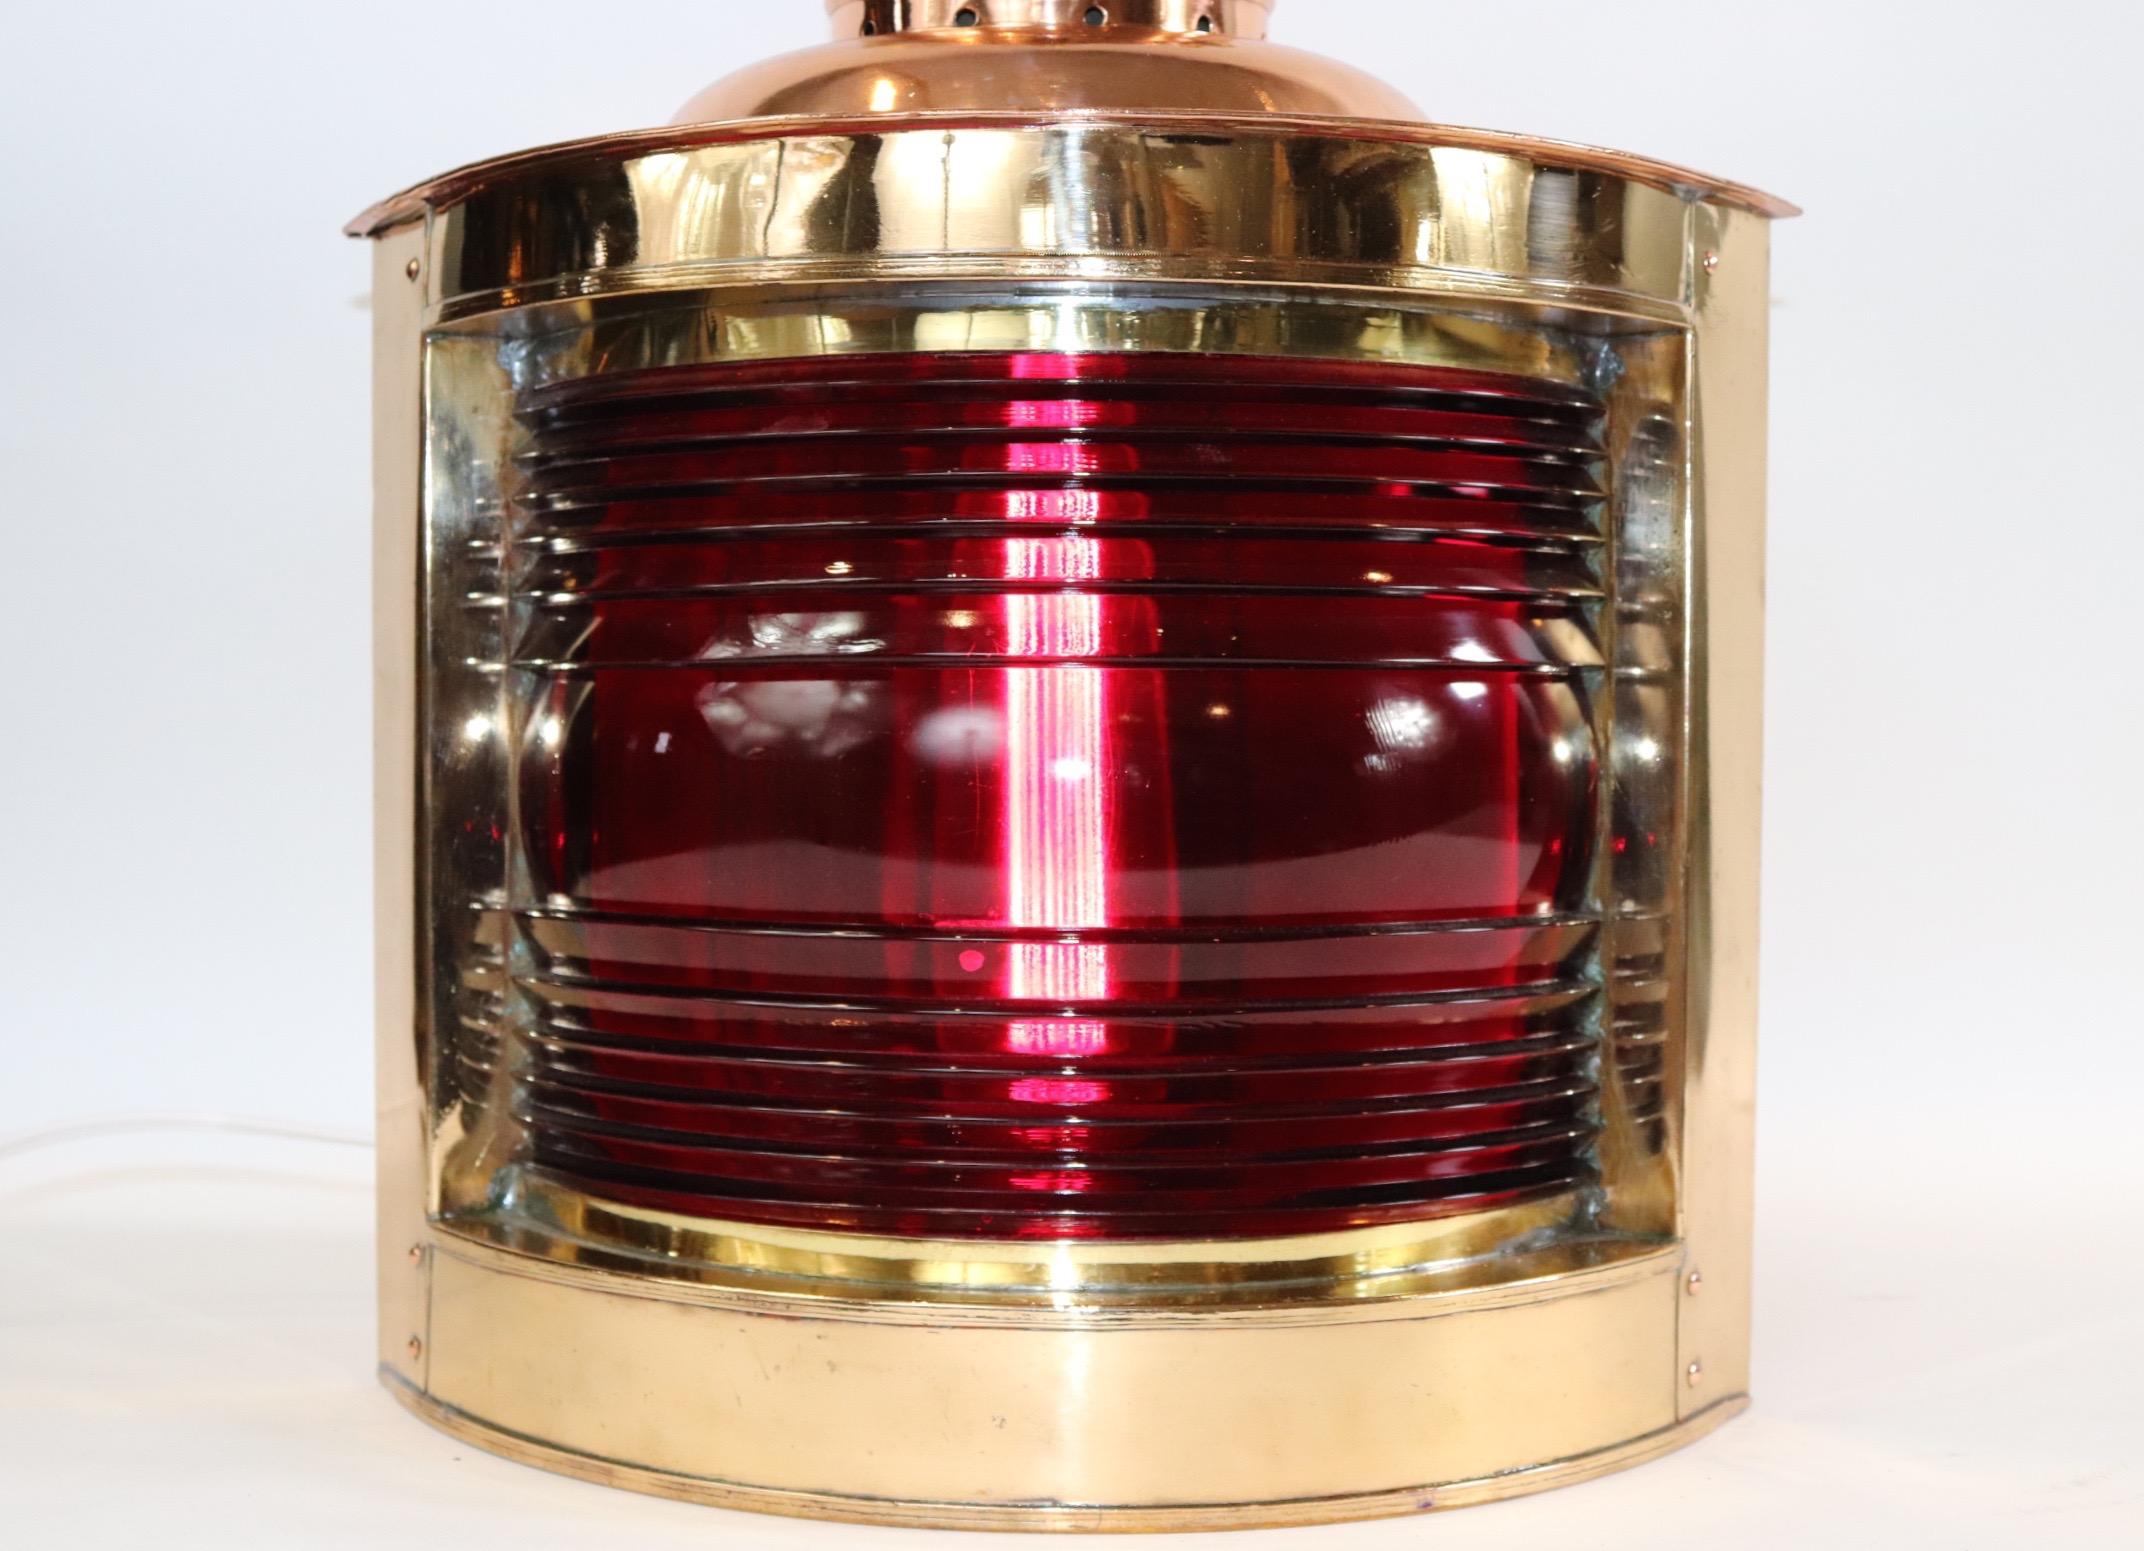 Solid brass ships port lantern with deep red fresnel lens set into a highly polished and lacquered case. Lantern has been wired with electric socket for home use. Weight is 16 pounds.